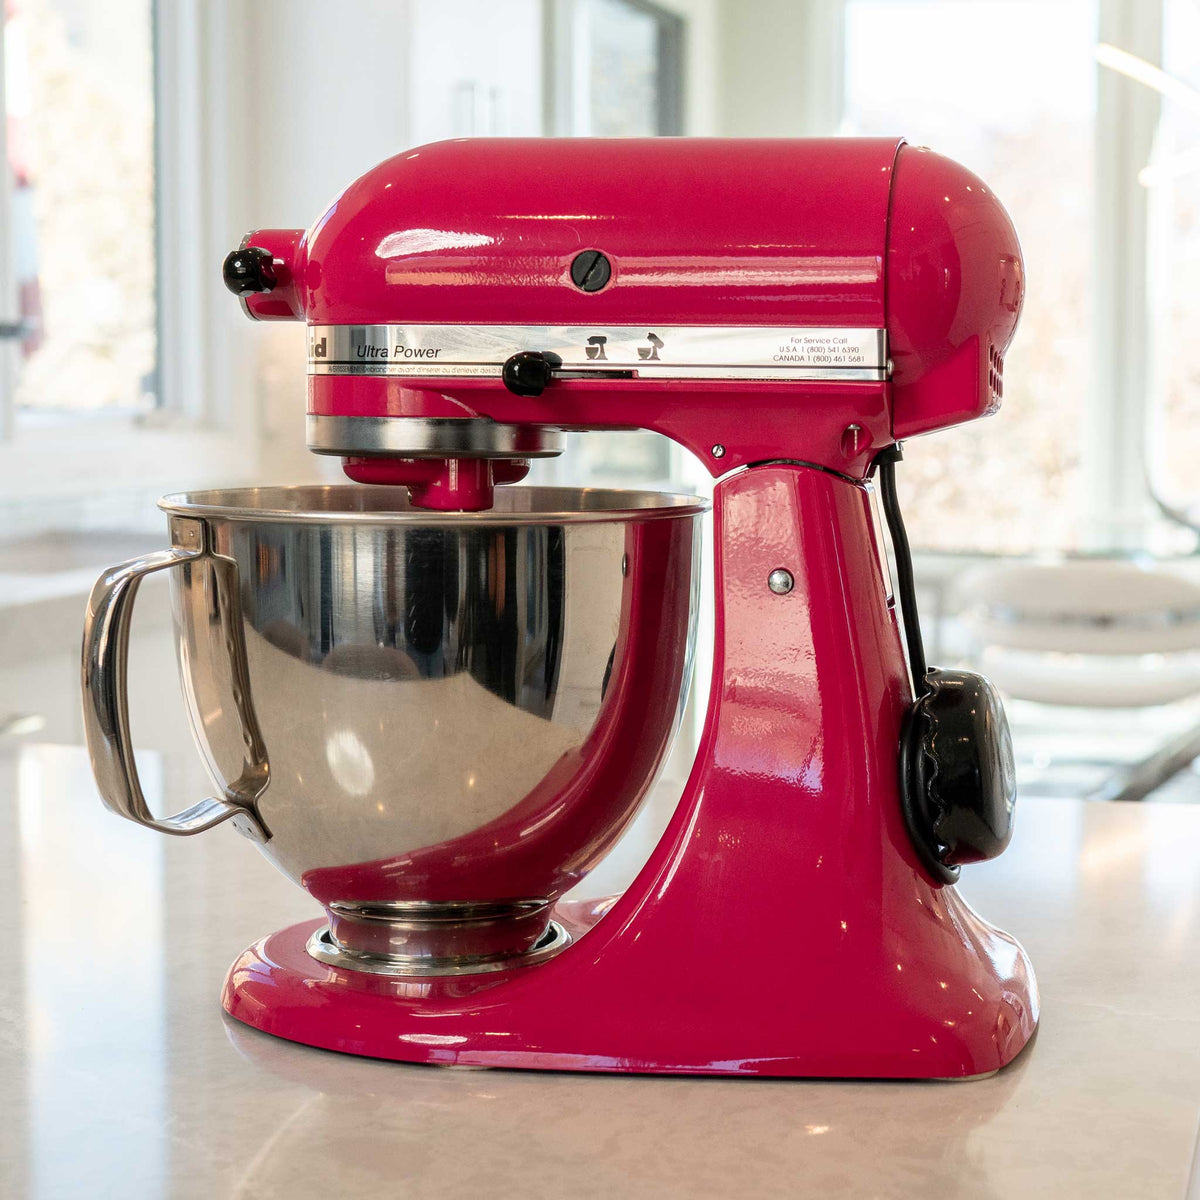 Kitchenaid Mixer Cord Wrap Quickly and Tidily Store Your Kitchen